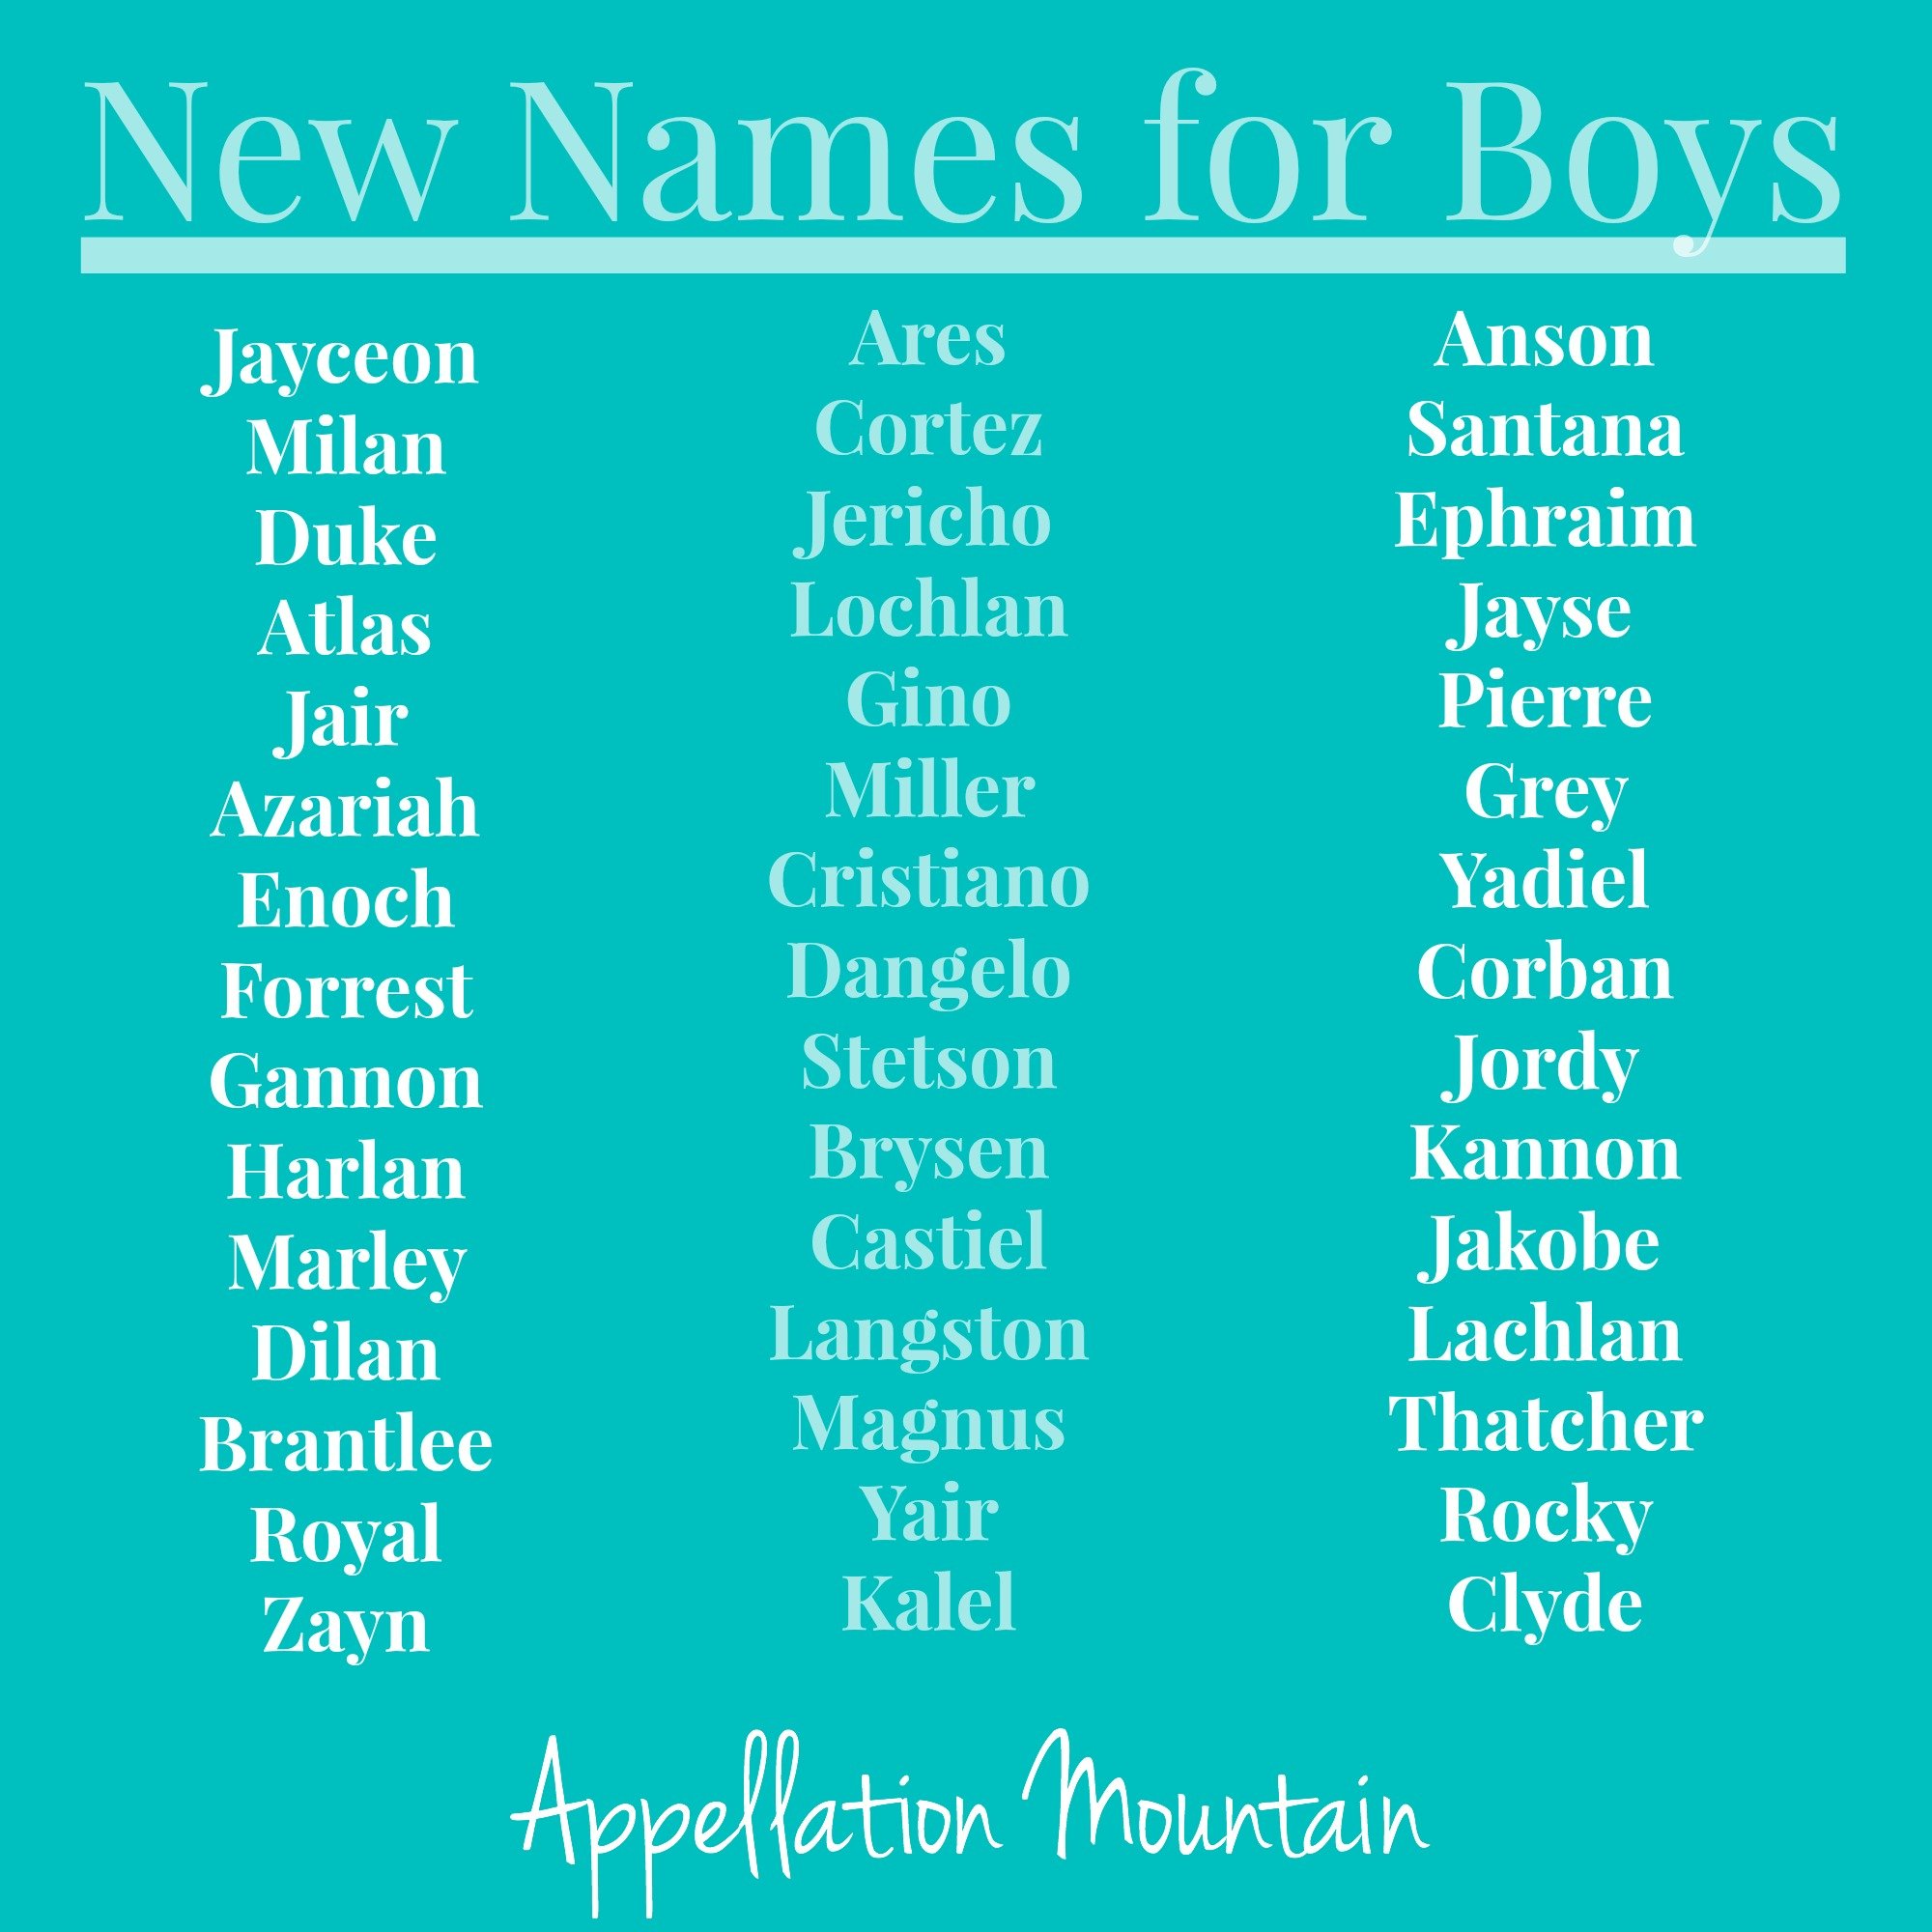 Julian And Gideon Ends With Ian Names For Boys Appellation Mountain